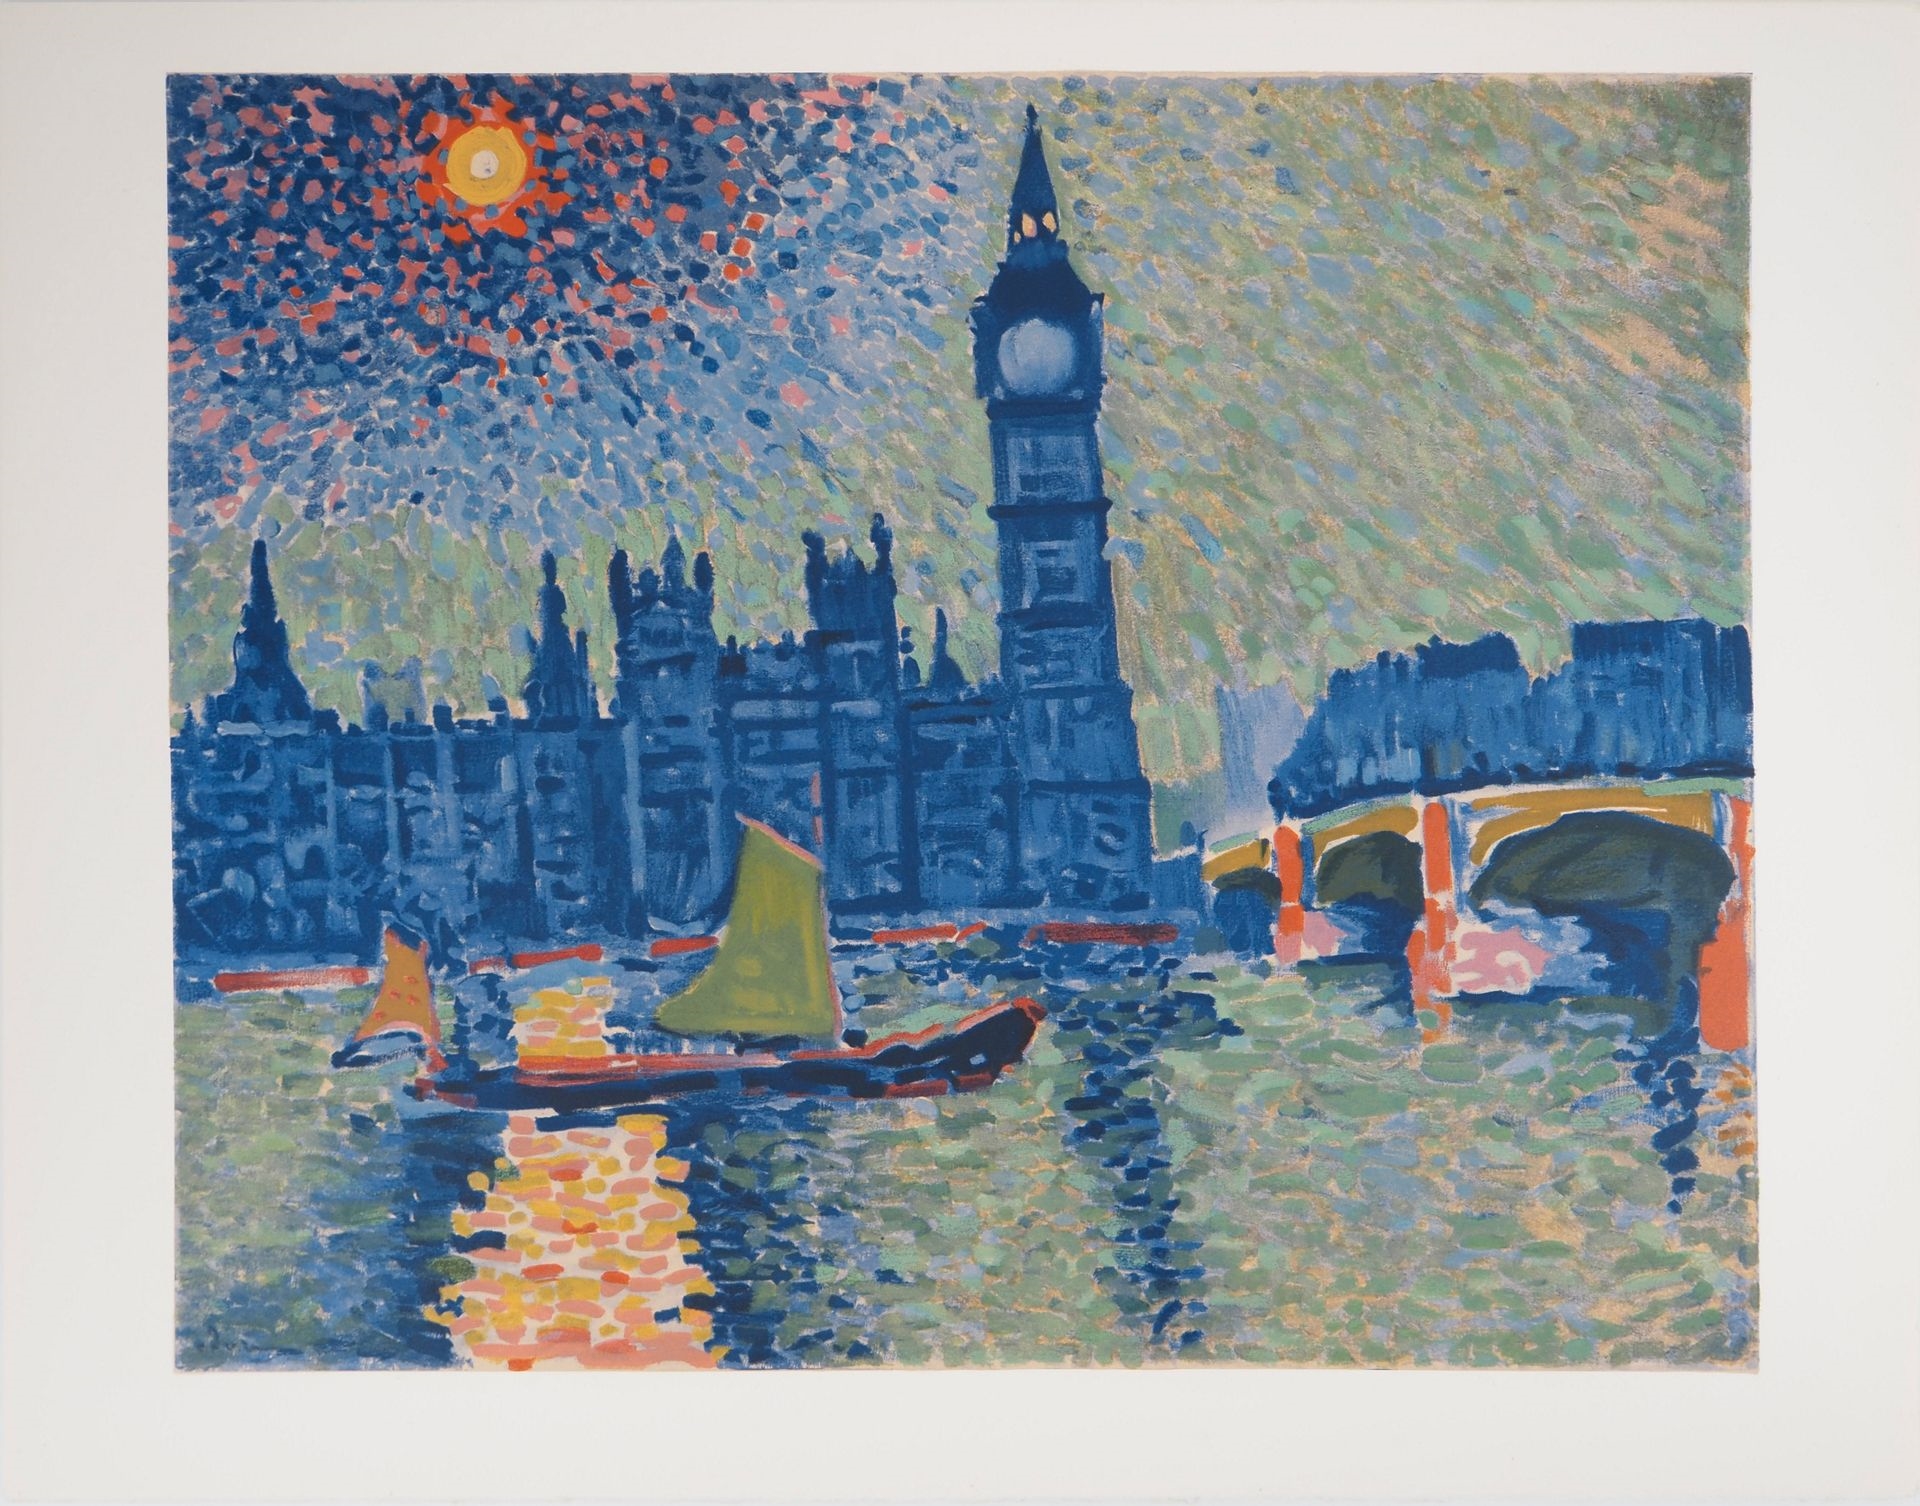 London; The Thames and Big Ben by André Derain